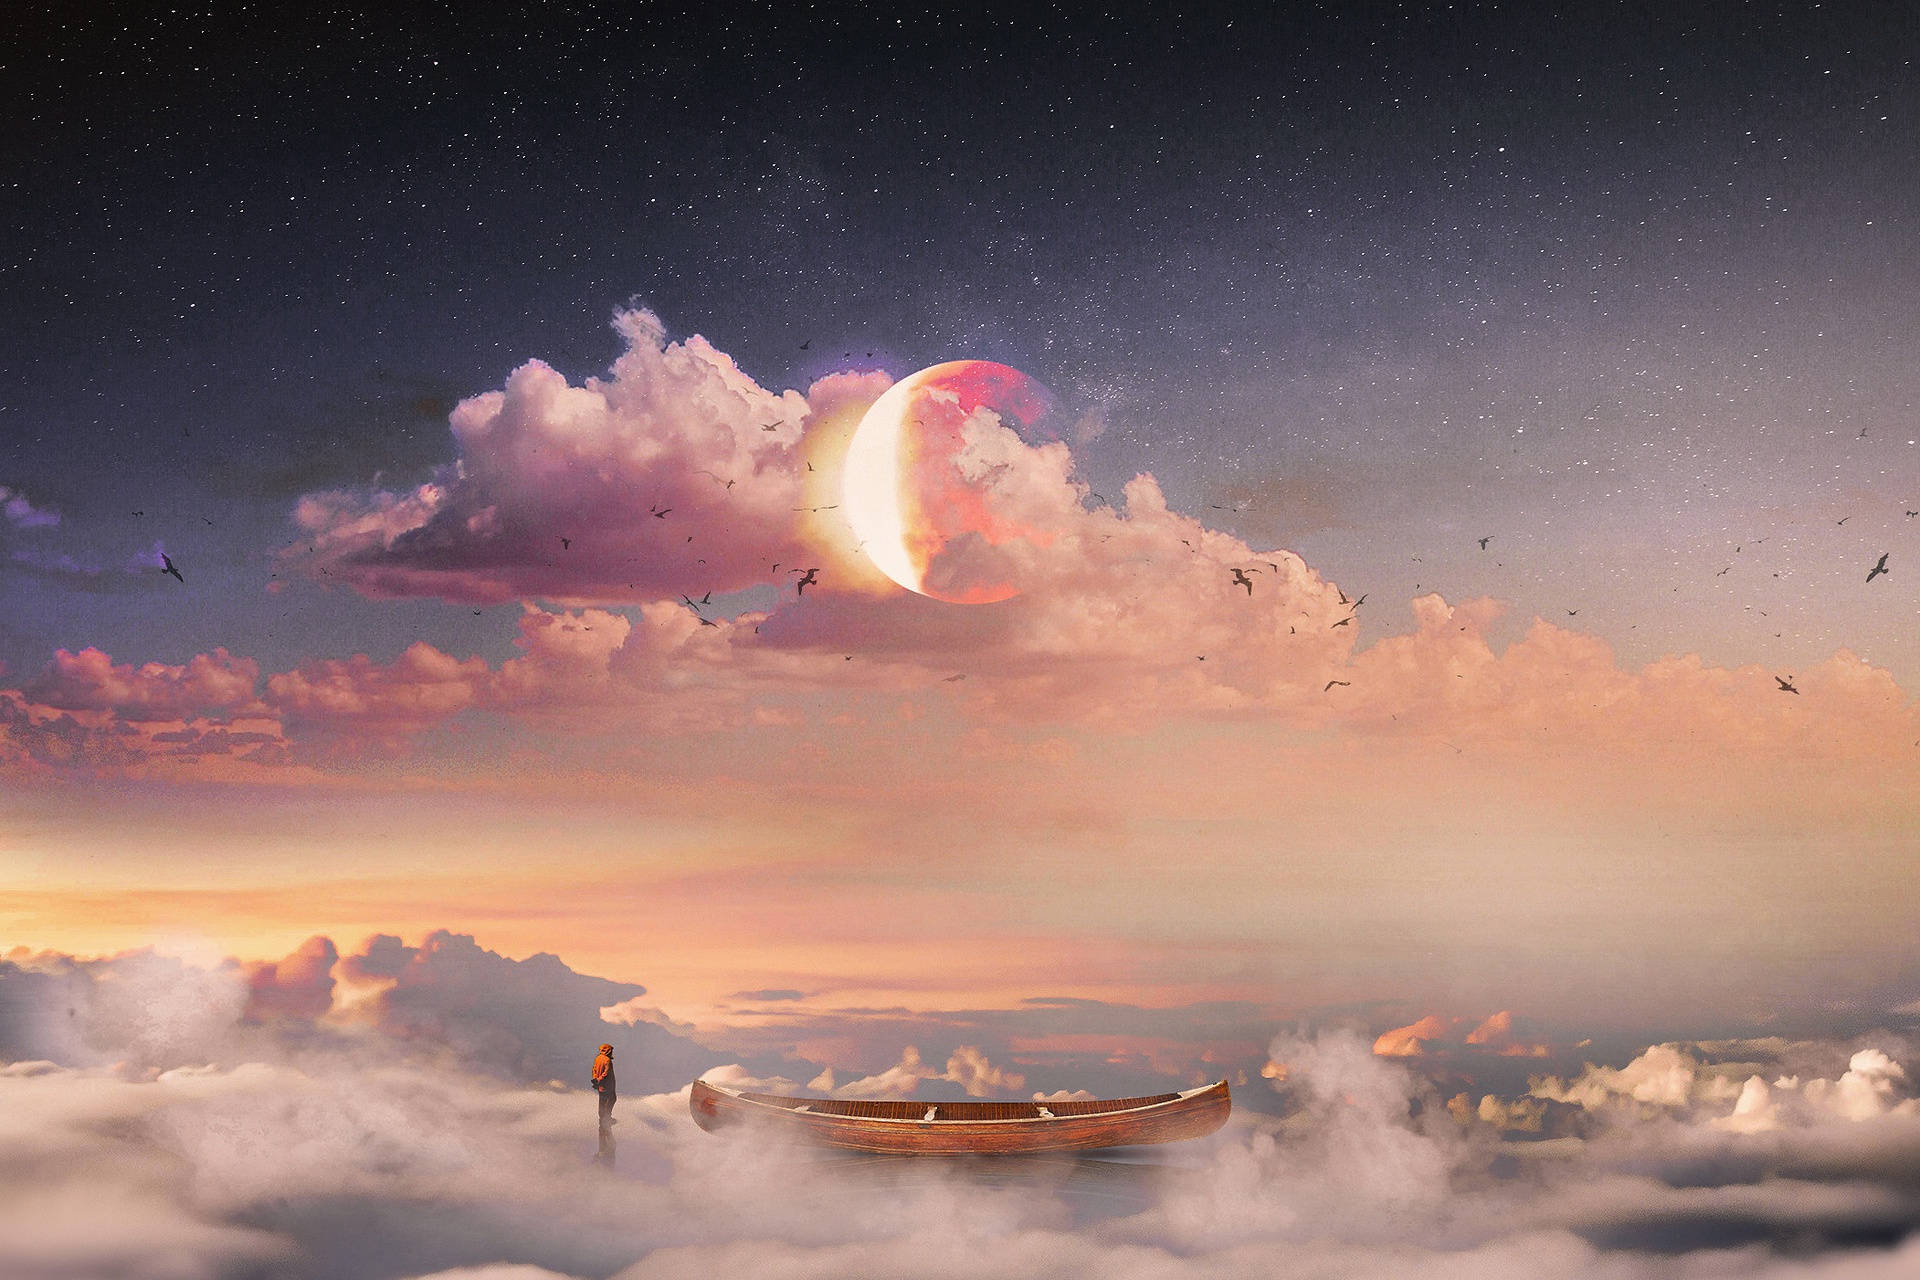 Dream Cloud And Boat Art Background